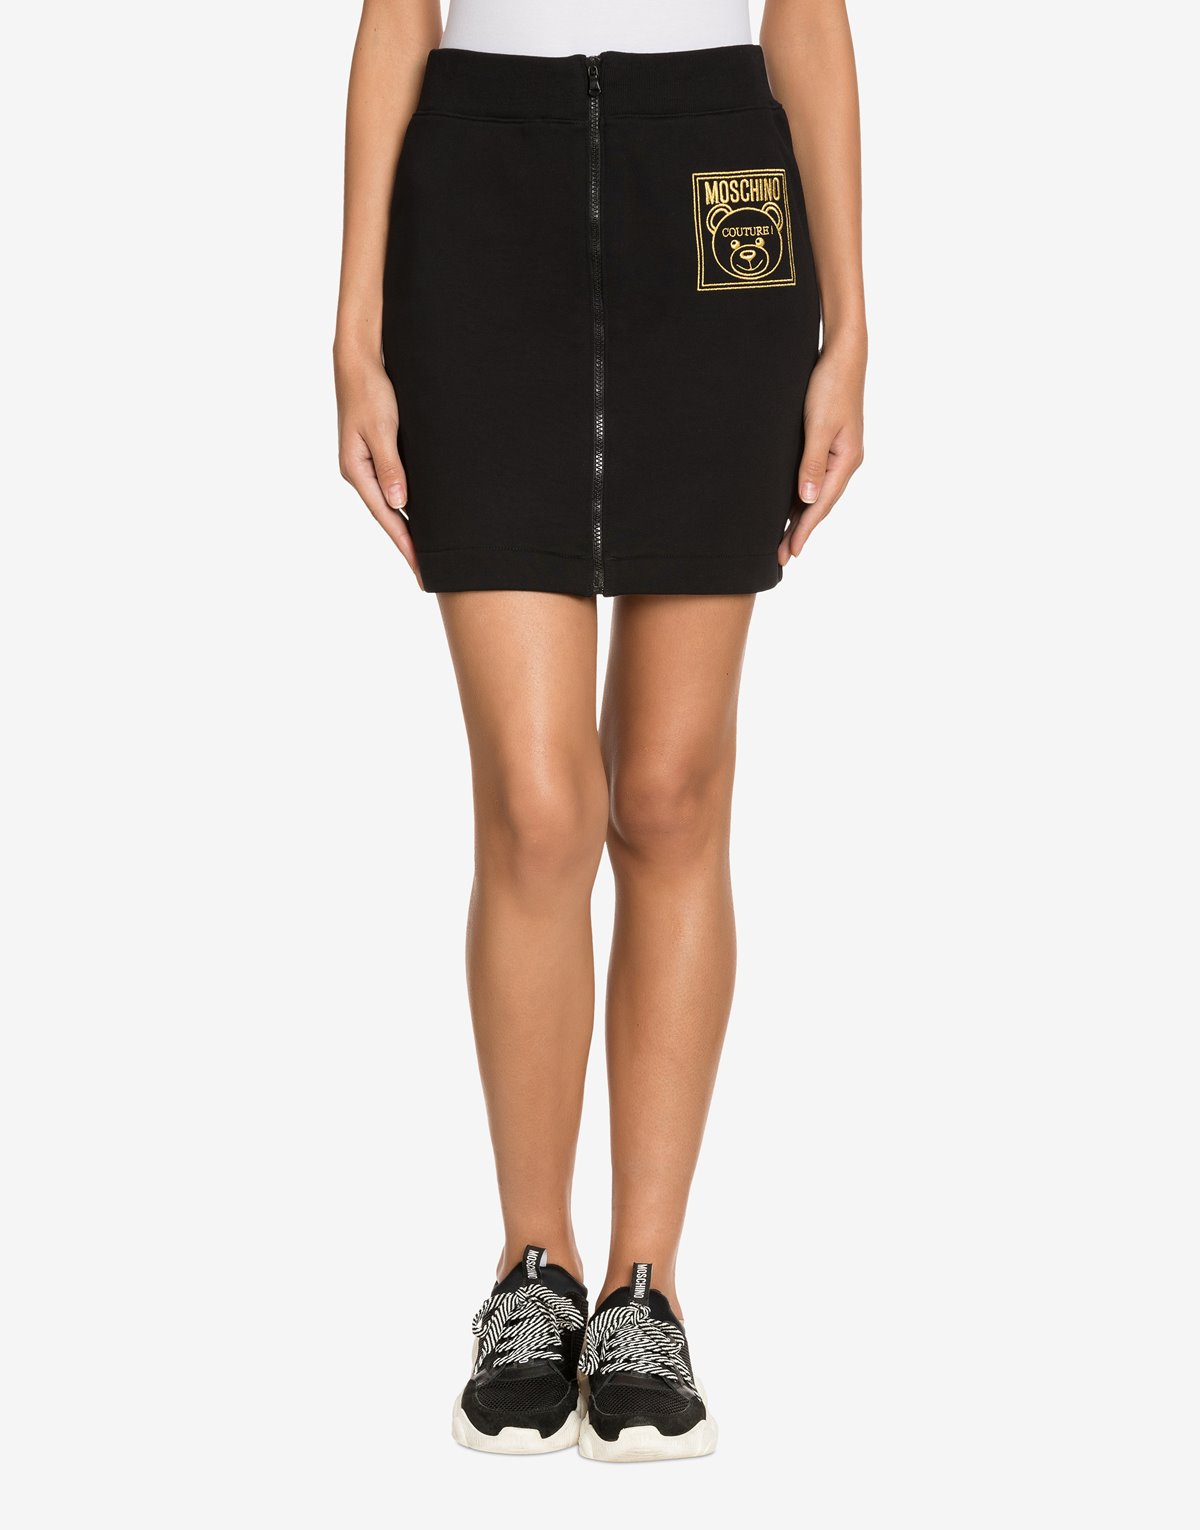 Drakesboutique - MOSCHINO Couture Bear Skirt Black Gold